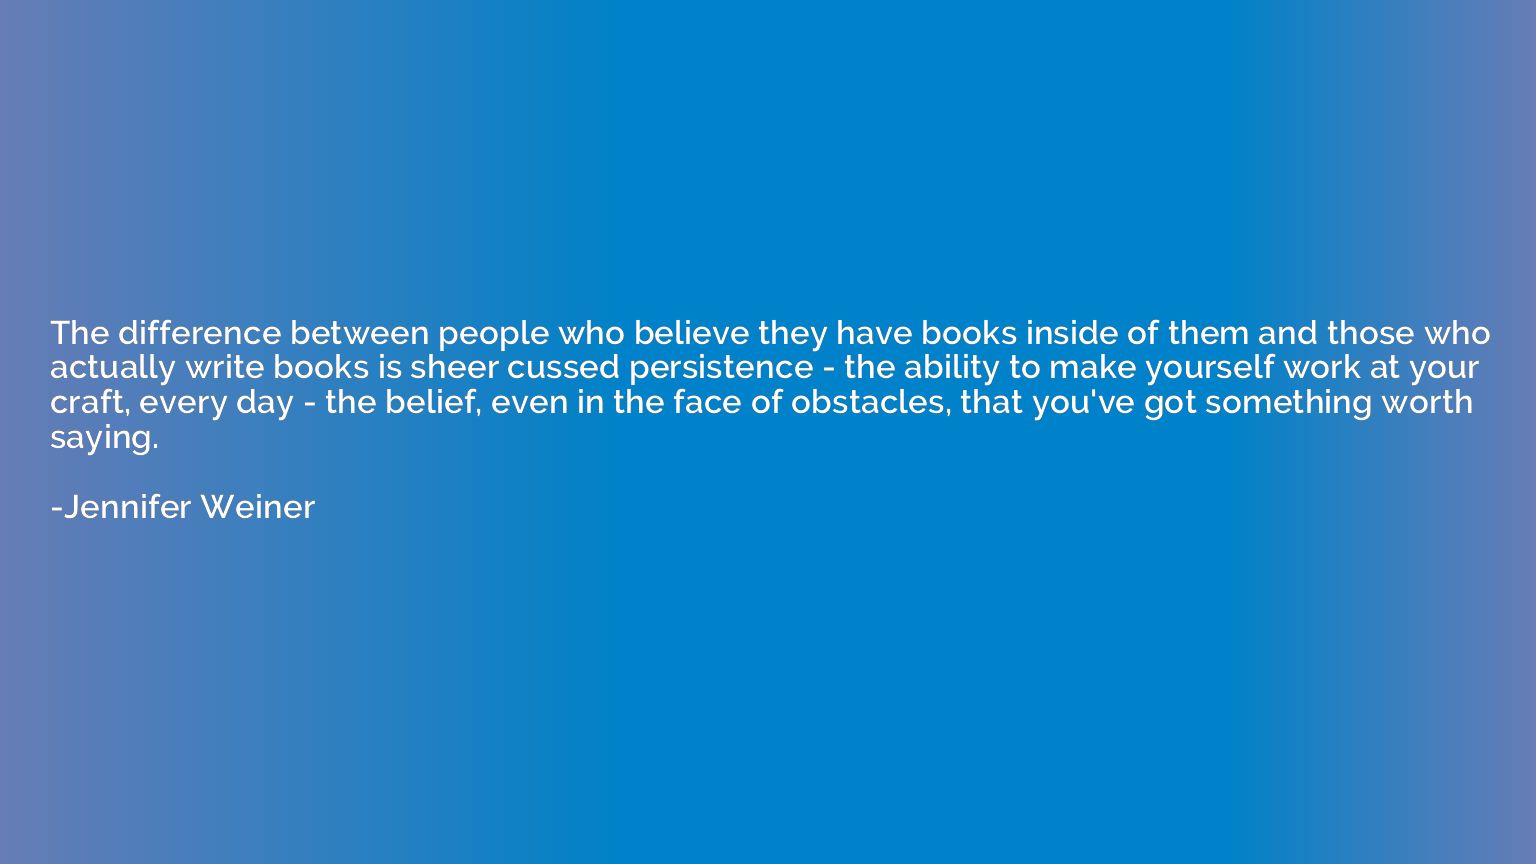 The difference between people who believe they have books in